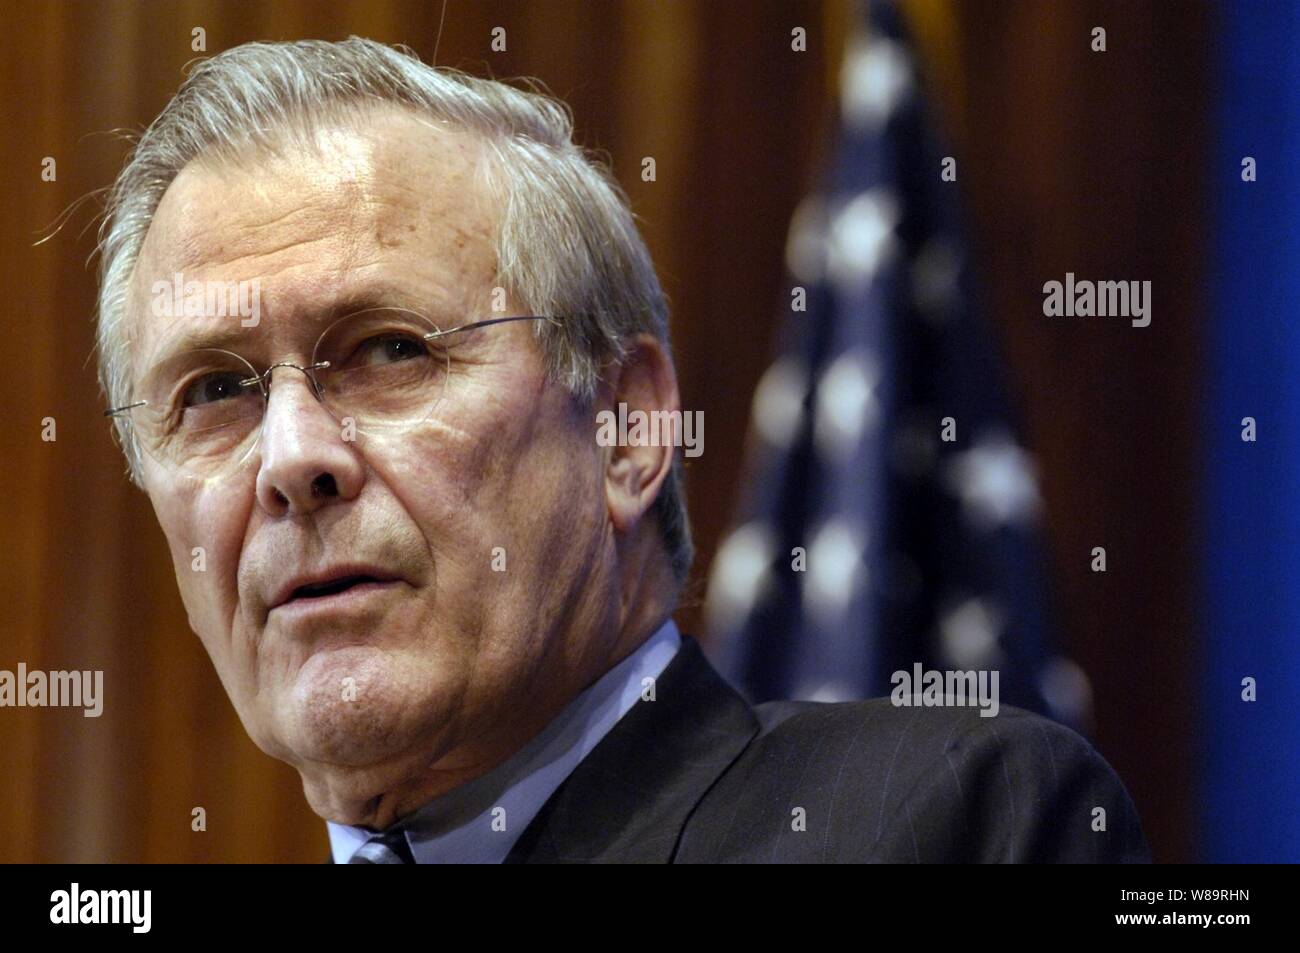 Secretary of Defense Donald H. Rumsfeld talks to reporters during the Newsmaker Lunch at the National Press Club in Washington, D.C., on Feb. 2, 2006.  Rumsfeld spoke to members about the global war on terrorism and took questions from the audience about numerous defense related topics. Stock Photo